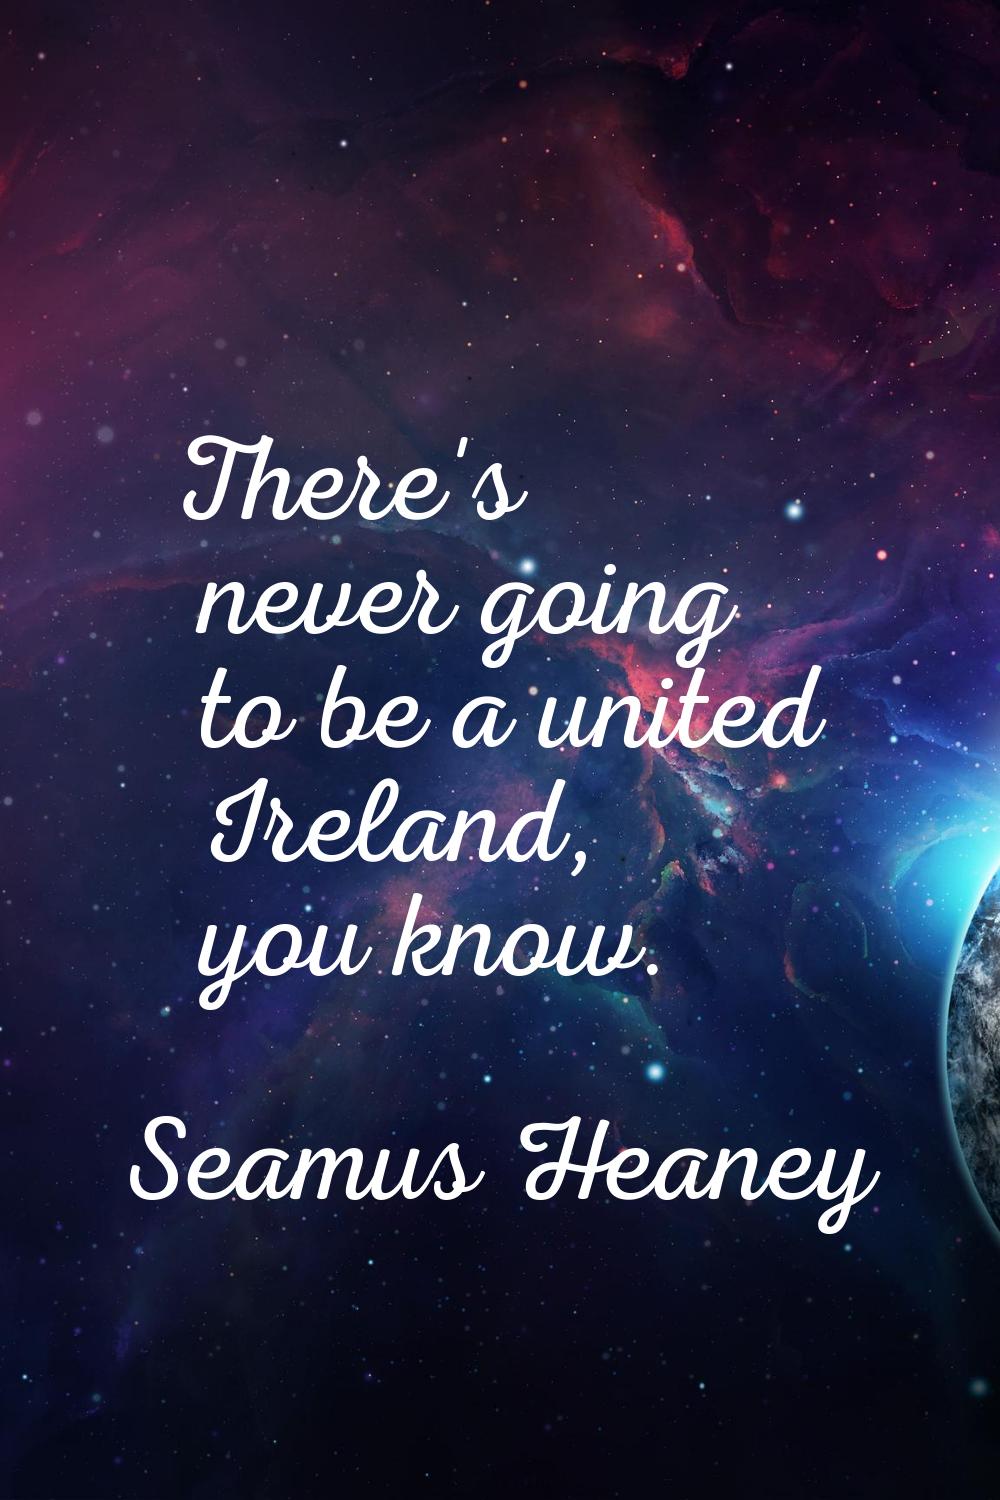 There's never going to be a united Ireland, you know.